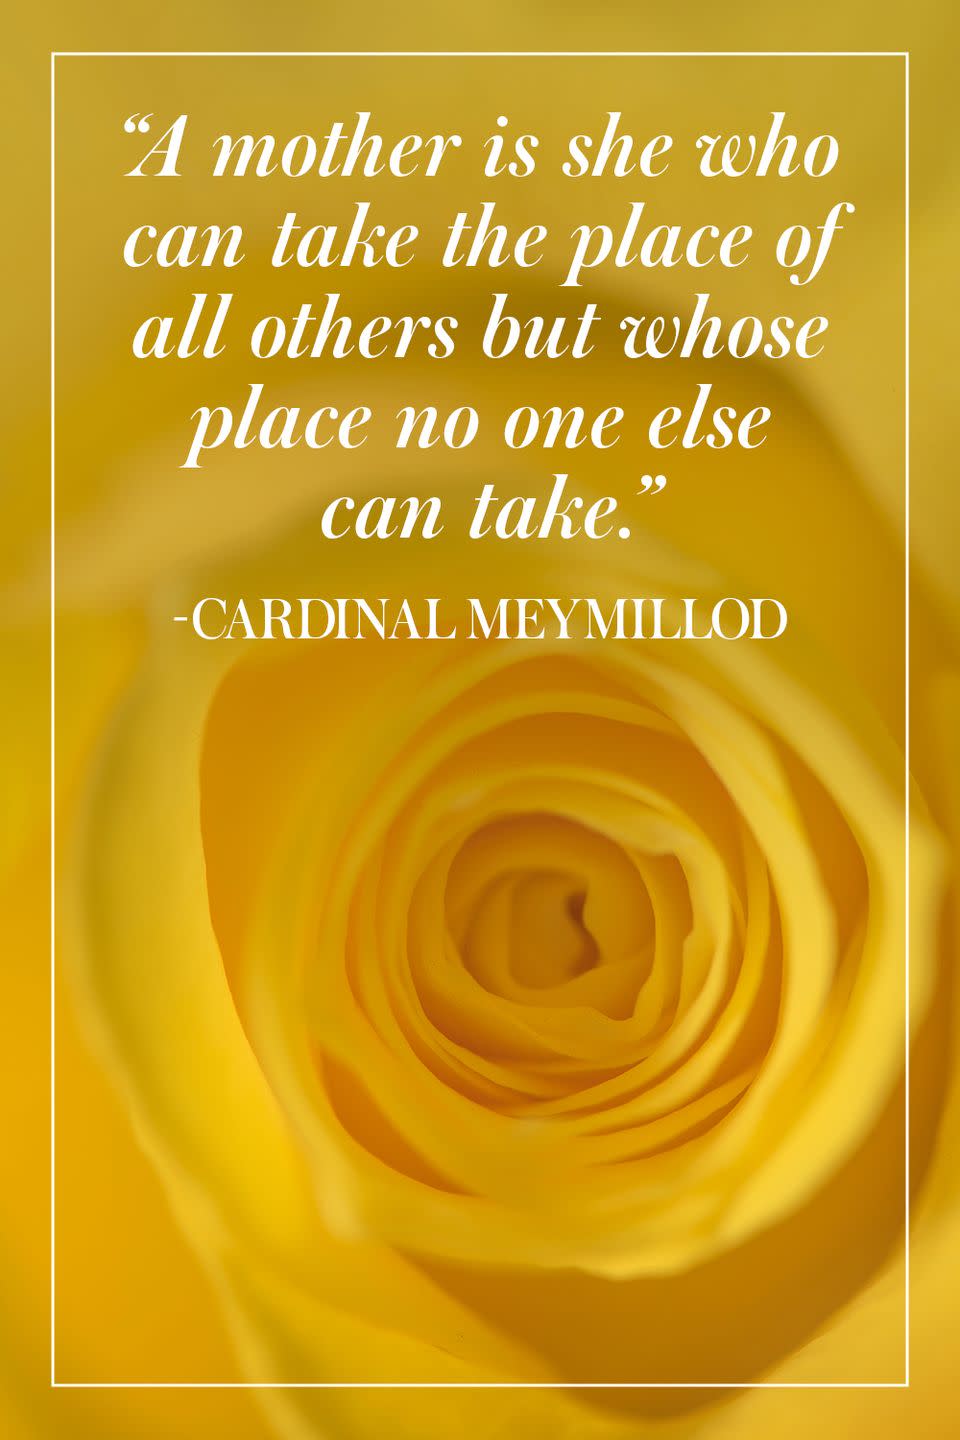 <p>"A mother is she who can take the place of all others but whose place no one else can take."</p><p>- Cardinal Meymillod</p>